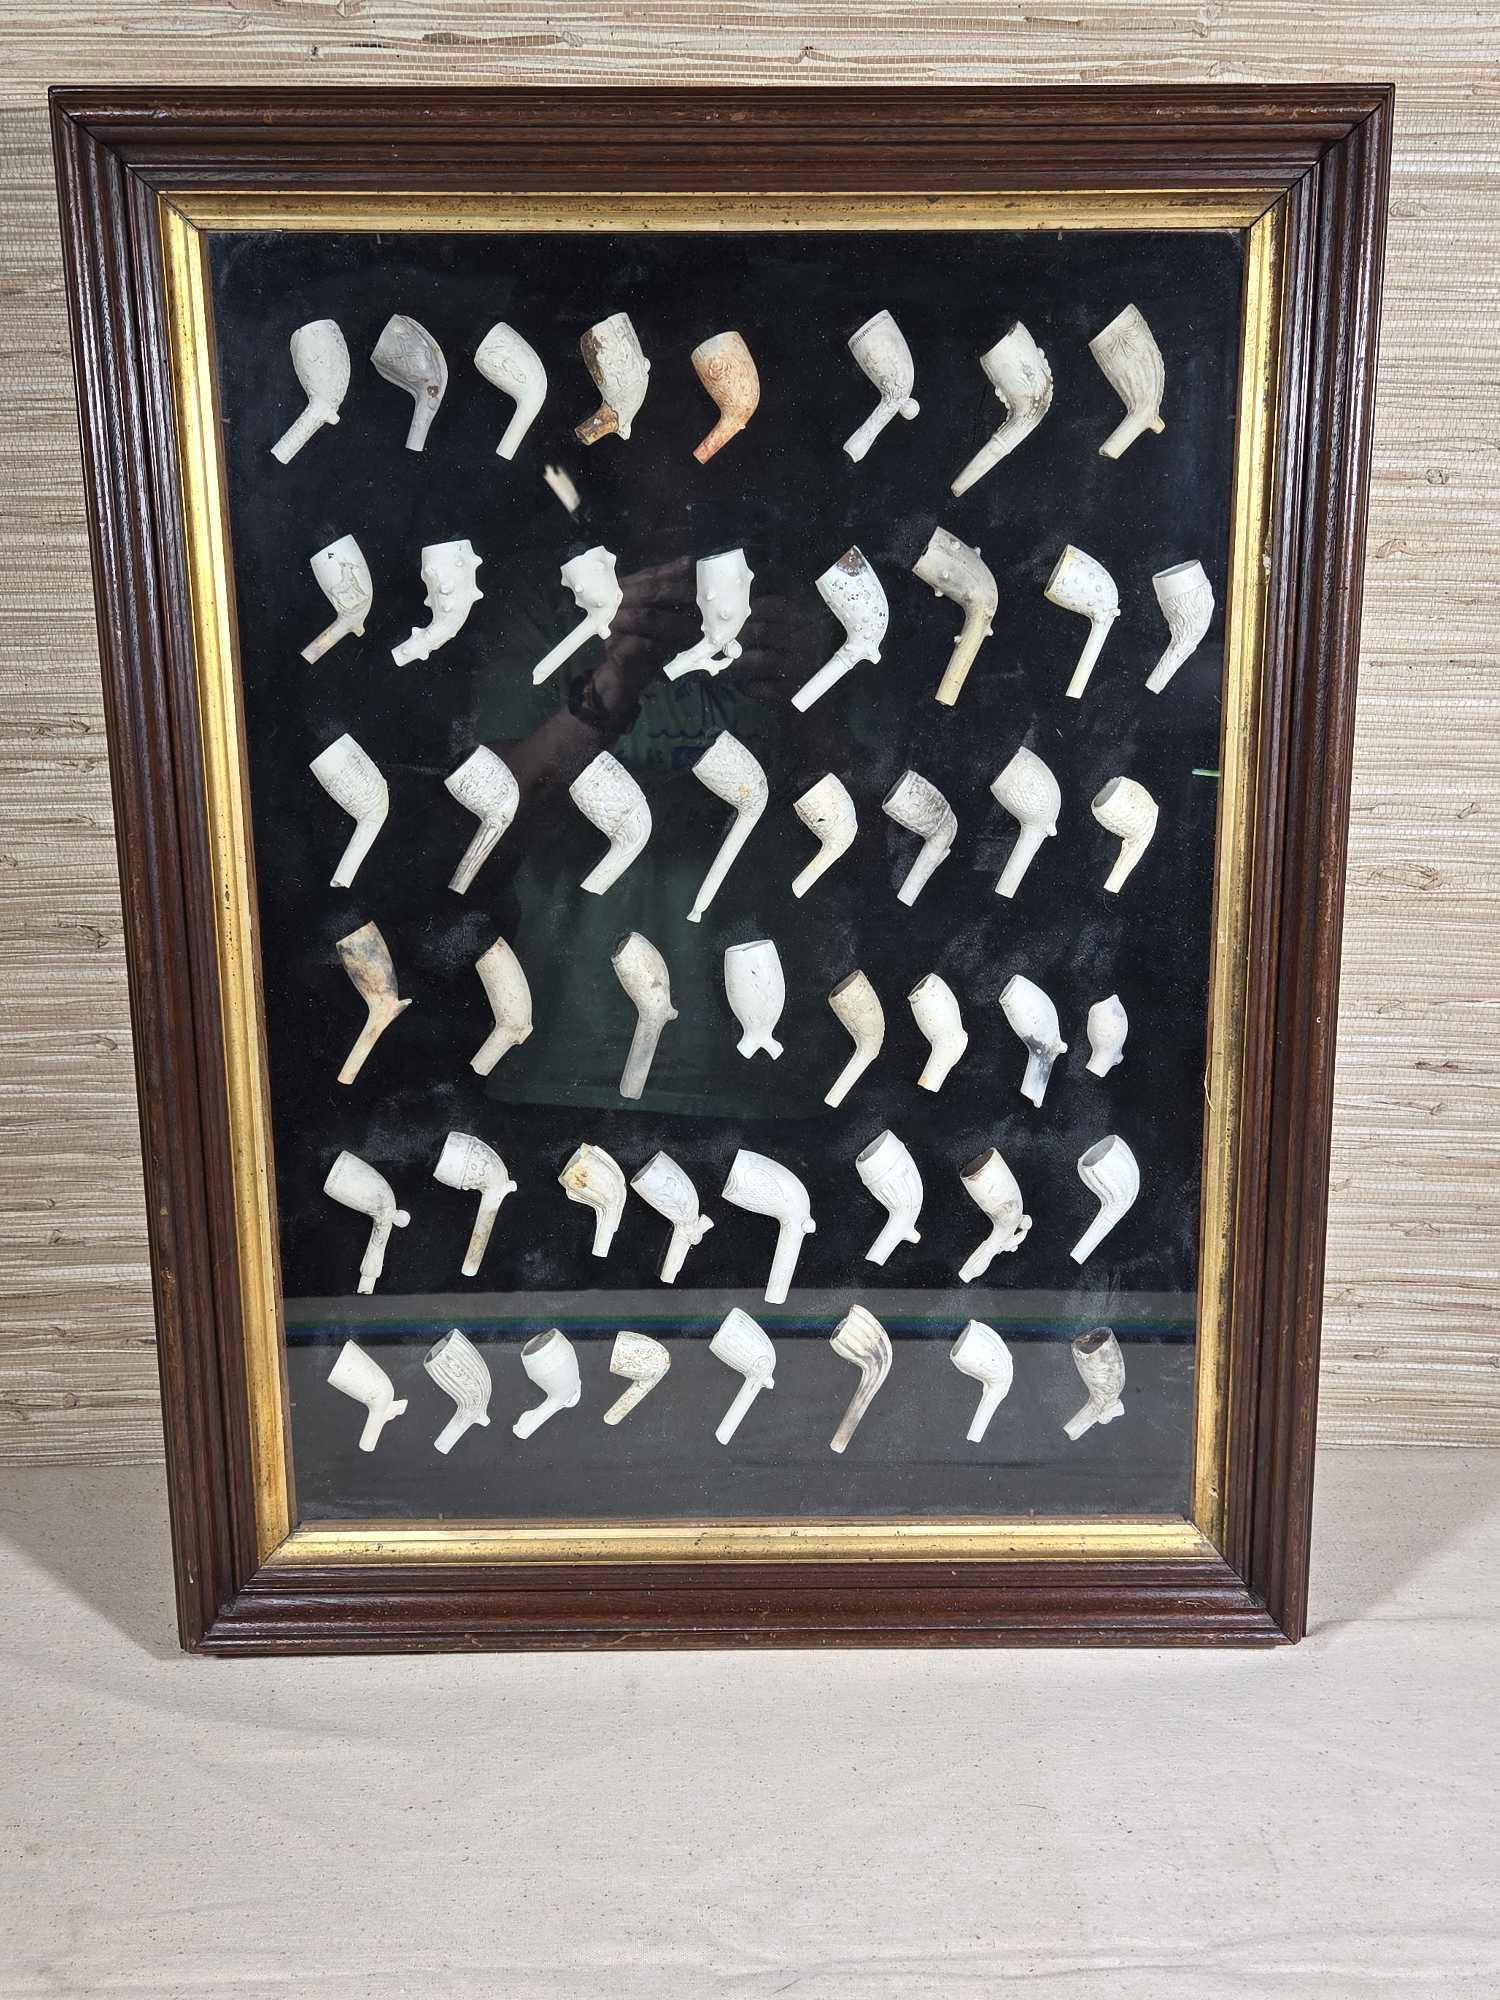 Nicely Framed Collection of Clay Pipes